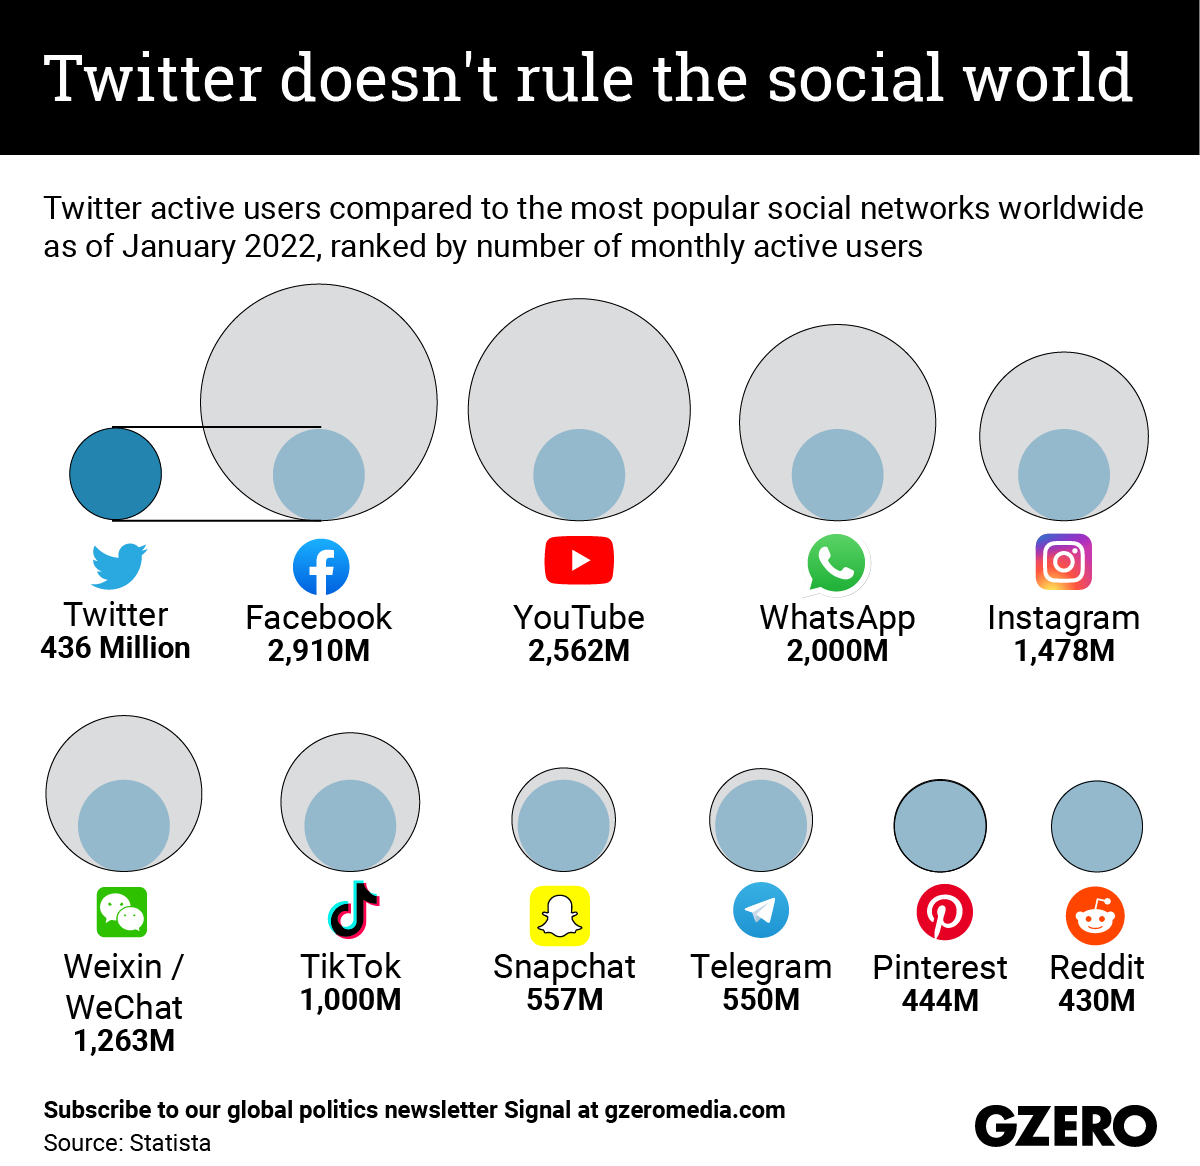 The Graphic Truth: Twitter doesn't rule the social world